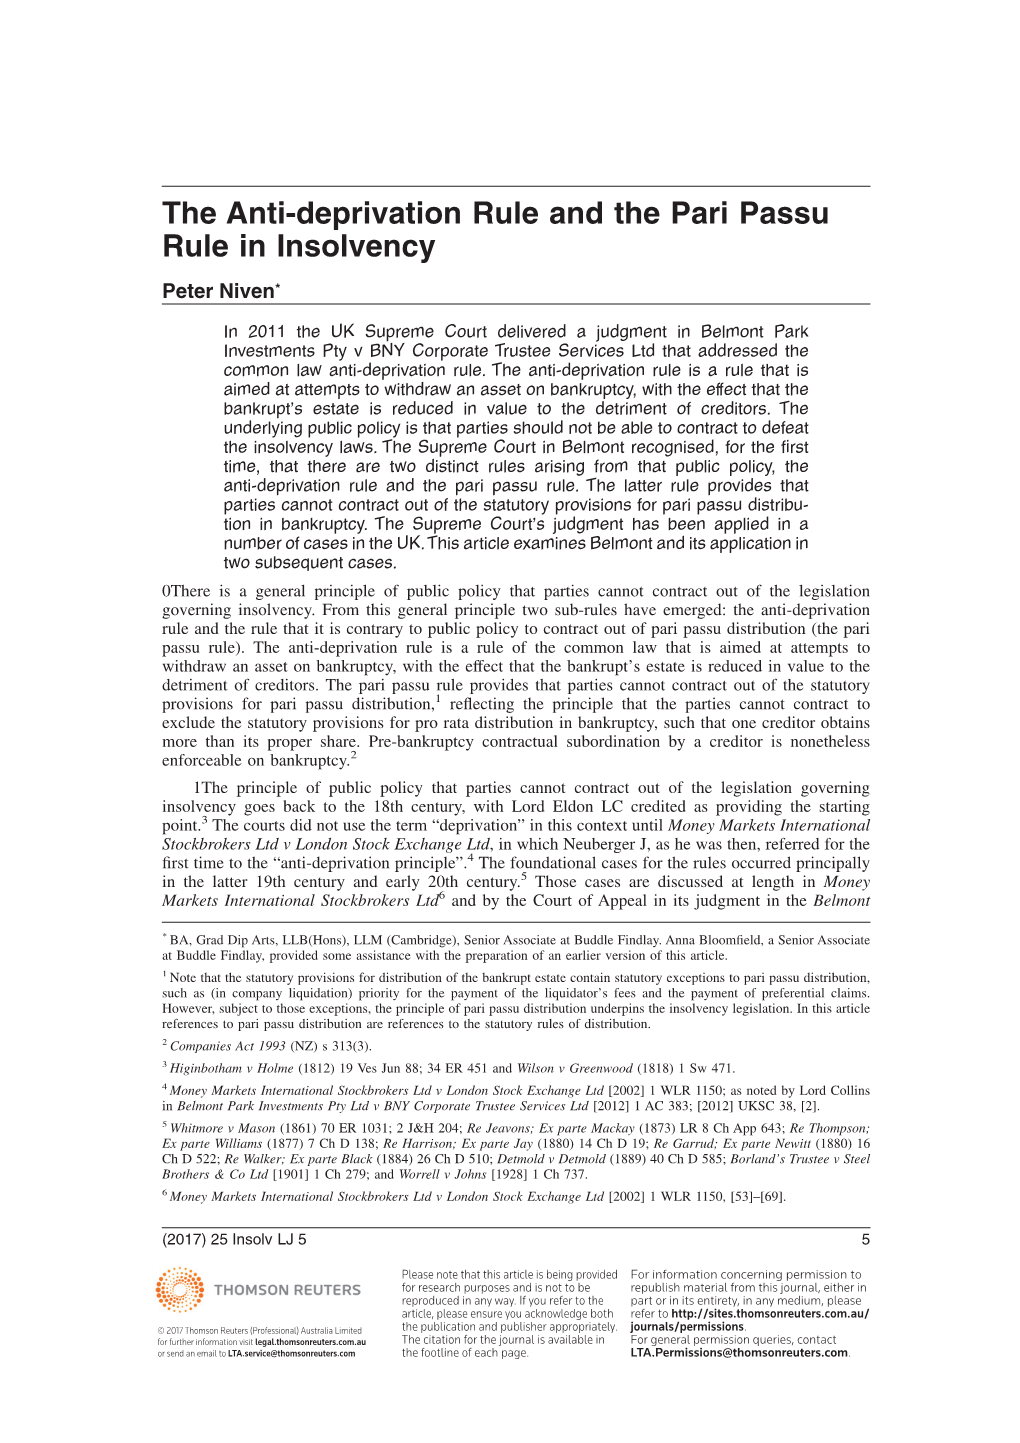 The Anti-Deprivation Rule and the Pari Passu Rule in Insolvency